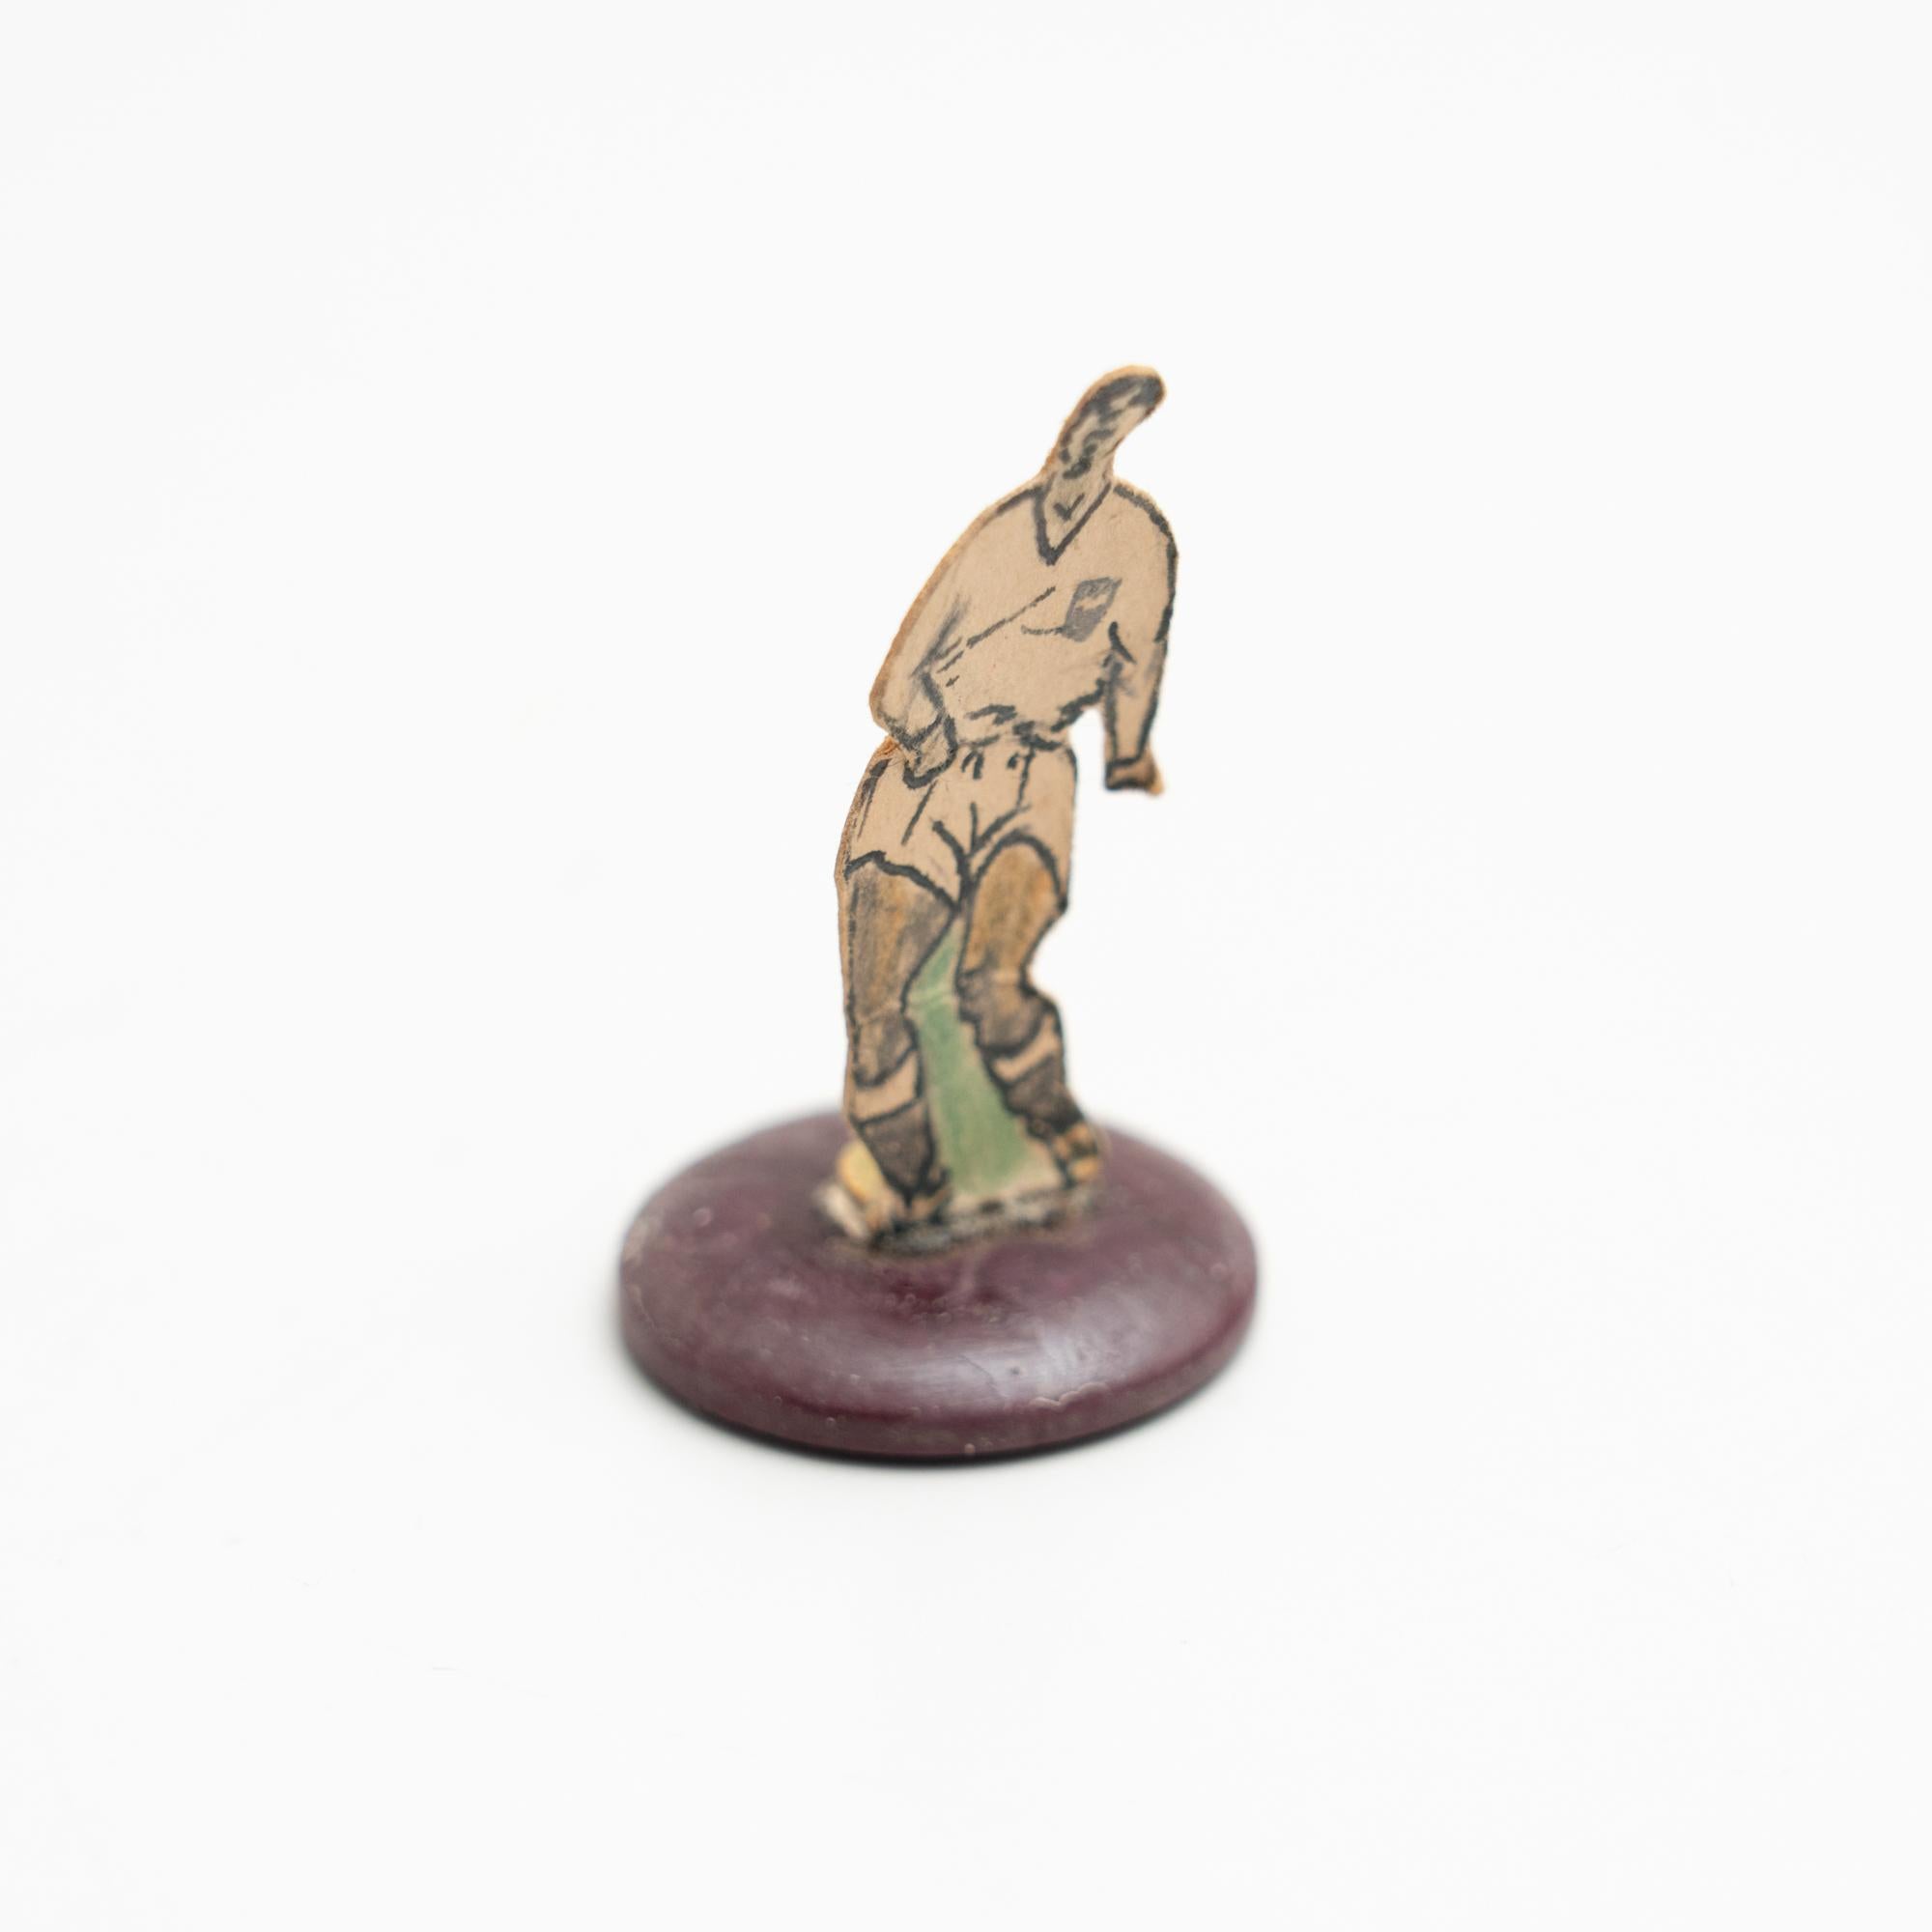 Set of 2 Traditional Antique Button Soccer Game Figures, circa 1950 For Sale 2